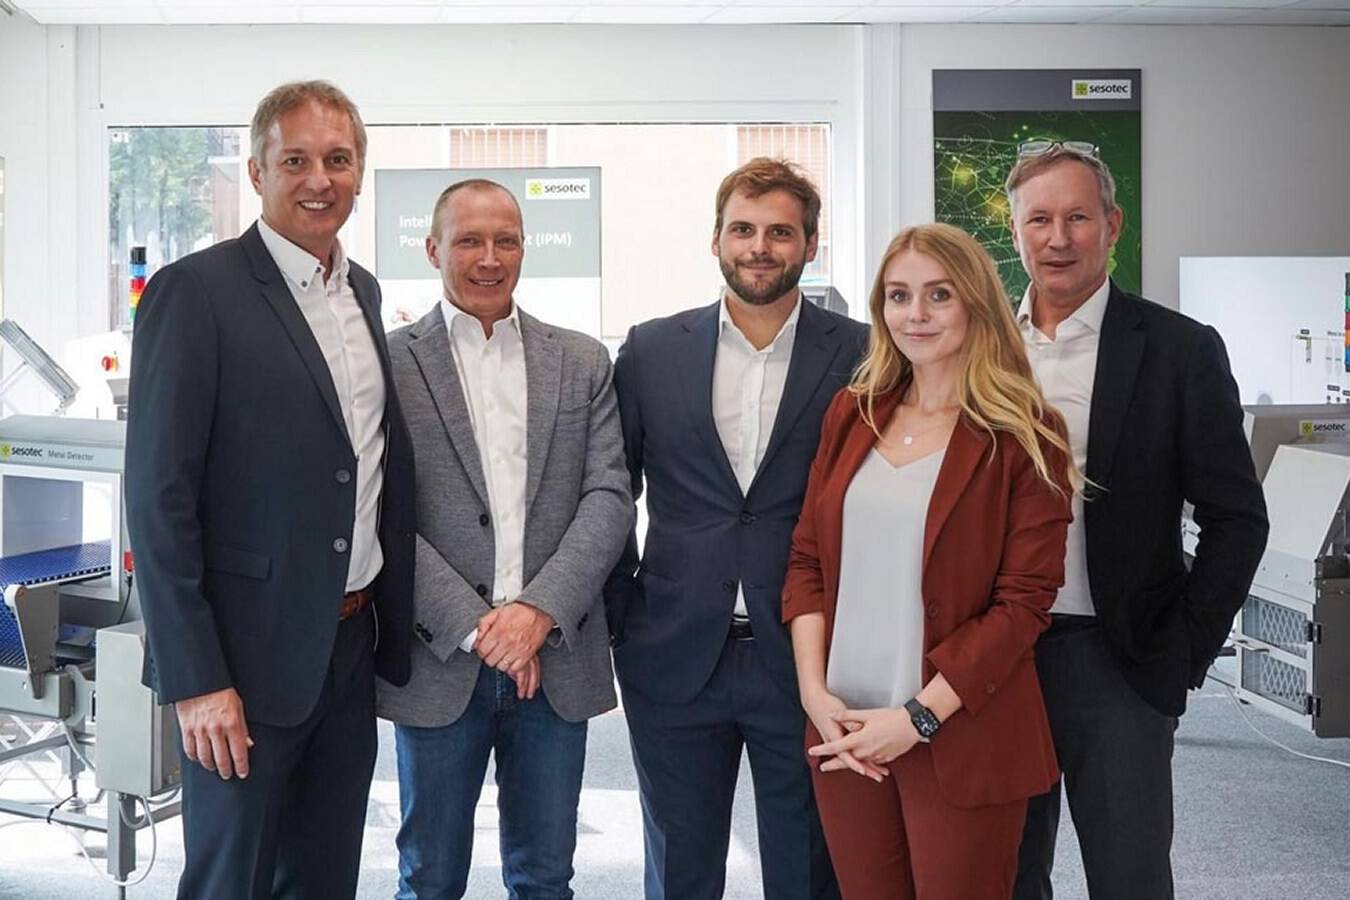 The Sesotec team - from left to right Paolo Mauri, Ulf Stöckelmann and Paolo Regazzoni as well as Franziska Lechner and Joachim Schulz - are pleased with the successful showroom near Milan in Varedo (Photo: Sesotec GmbH)